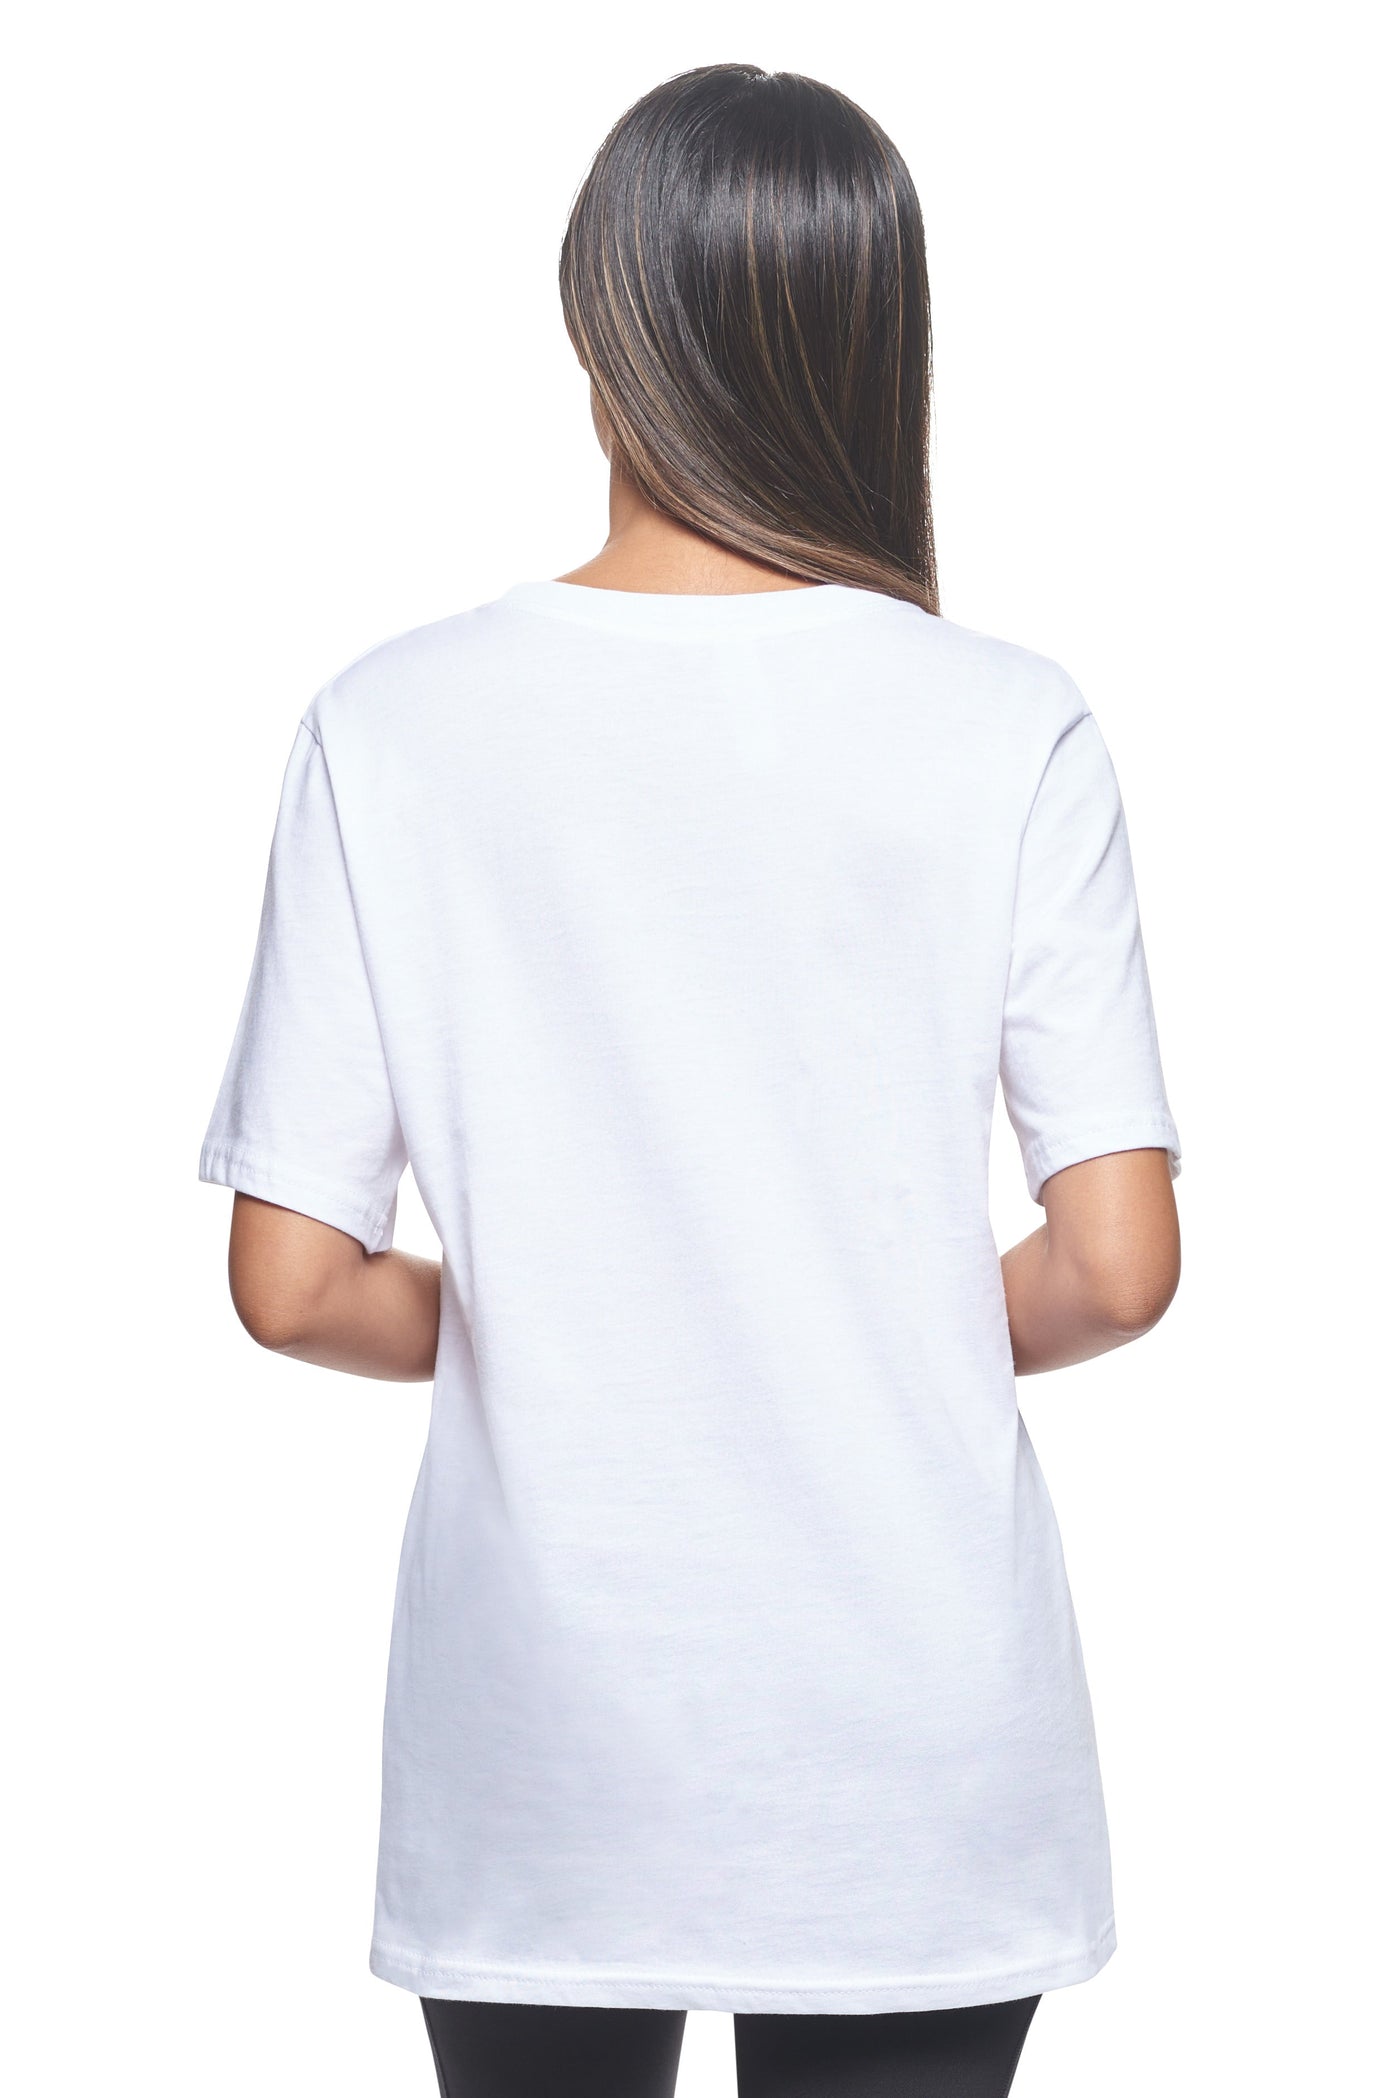 Expert Brand Retail Organic Cotton T-Shirt Made in USA Women's White 3#color_white